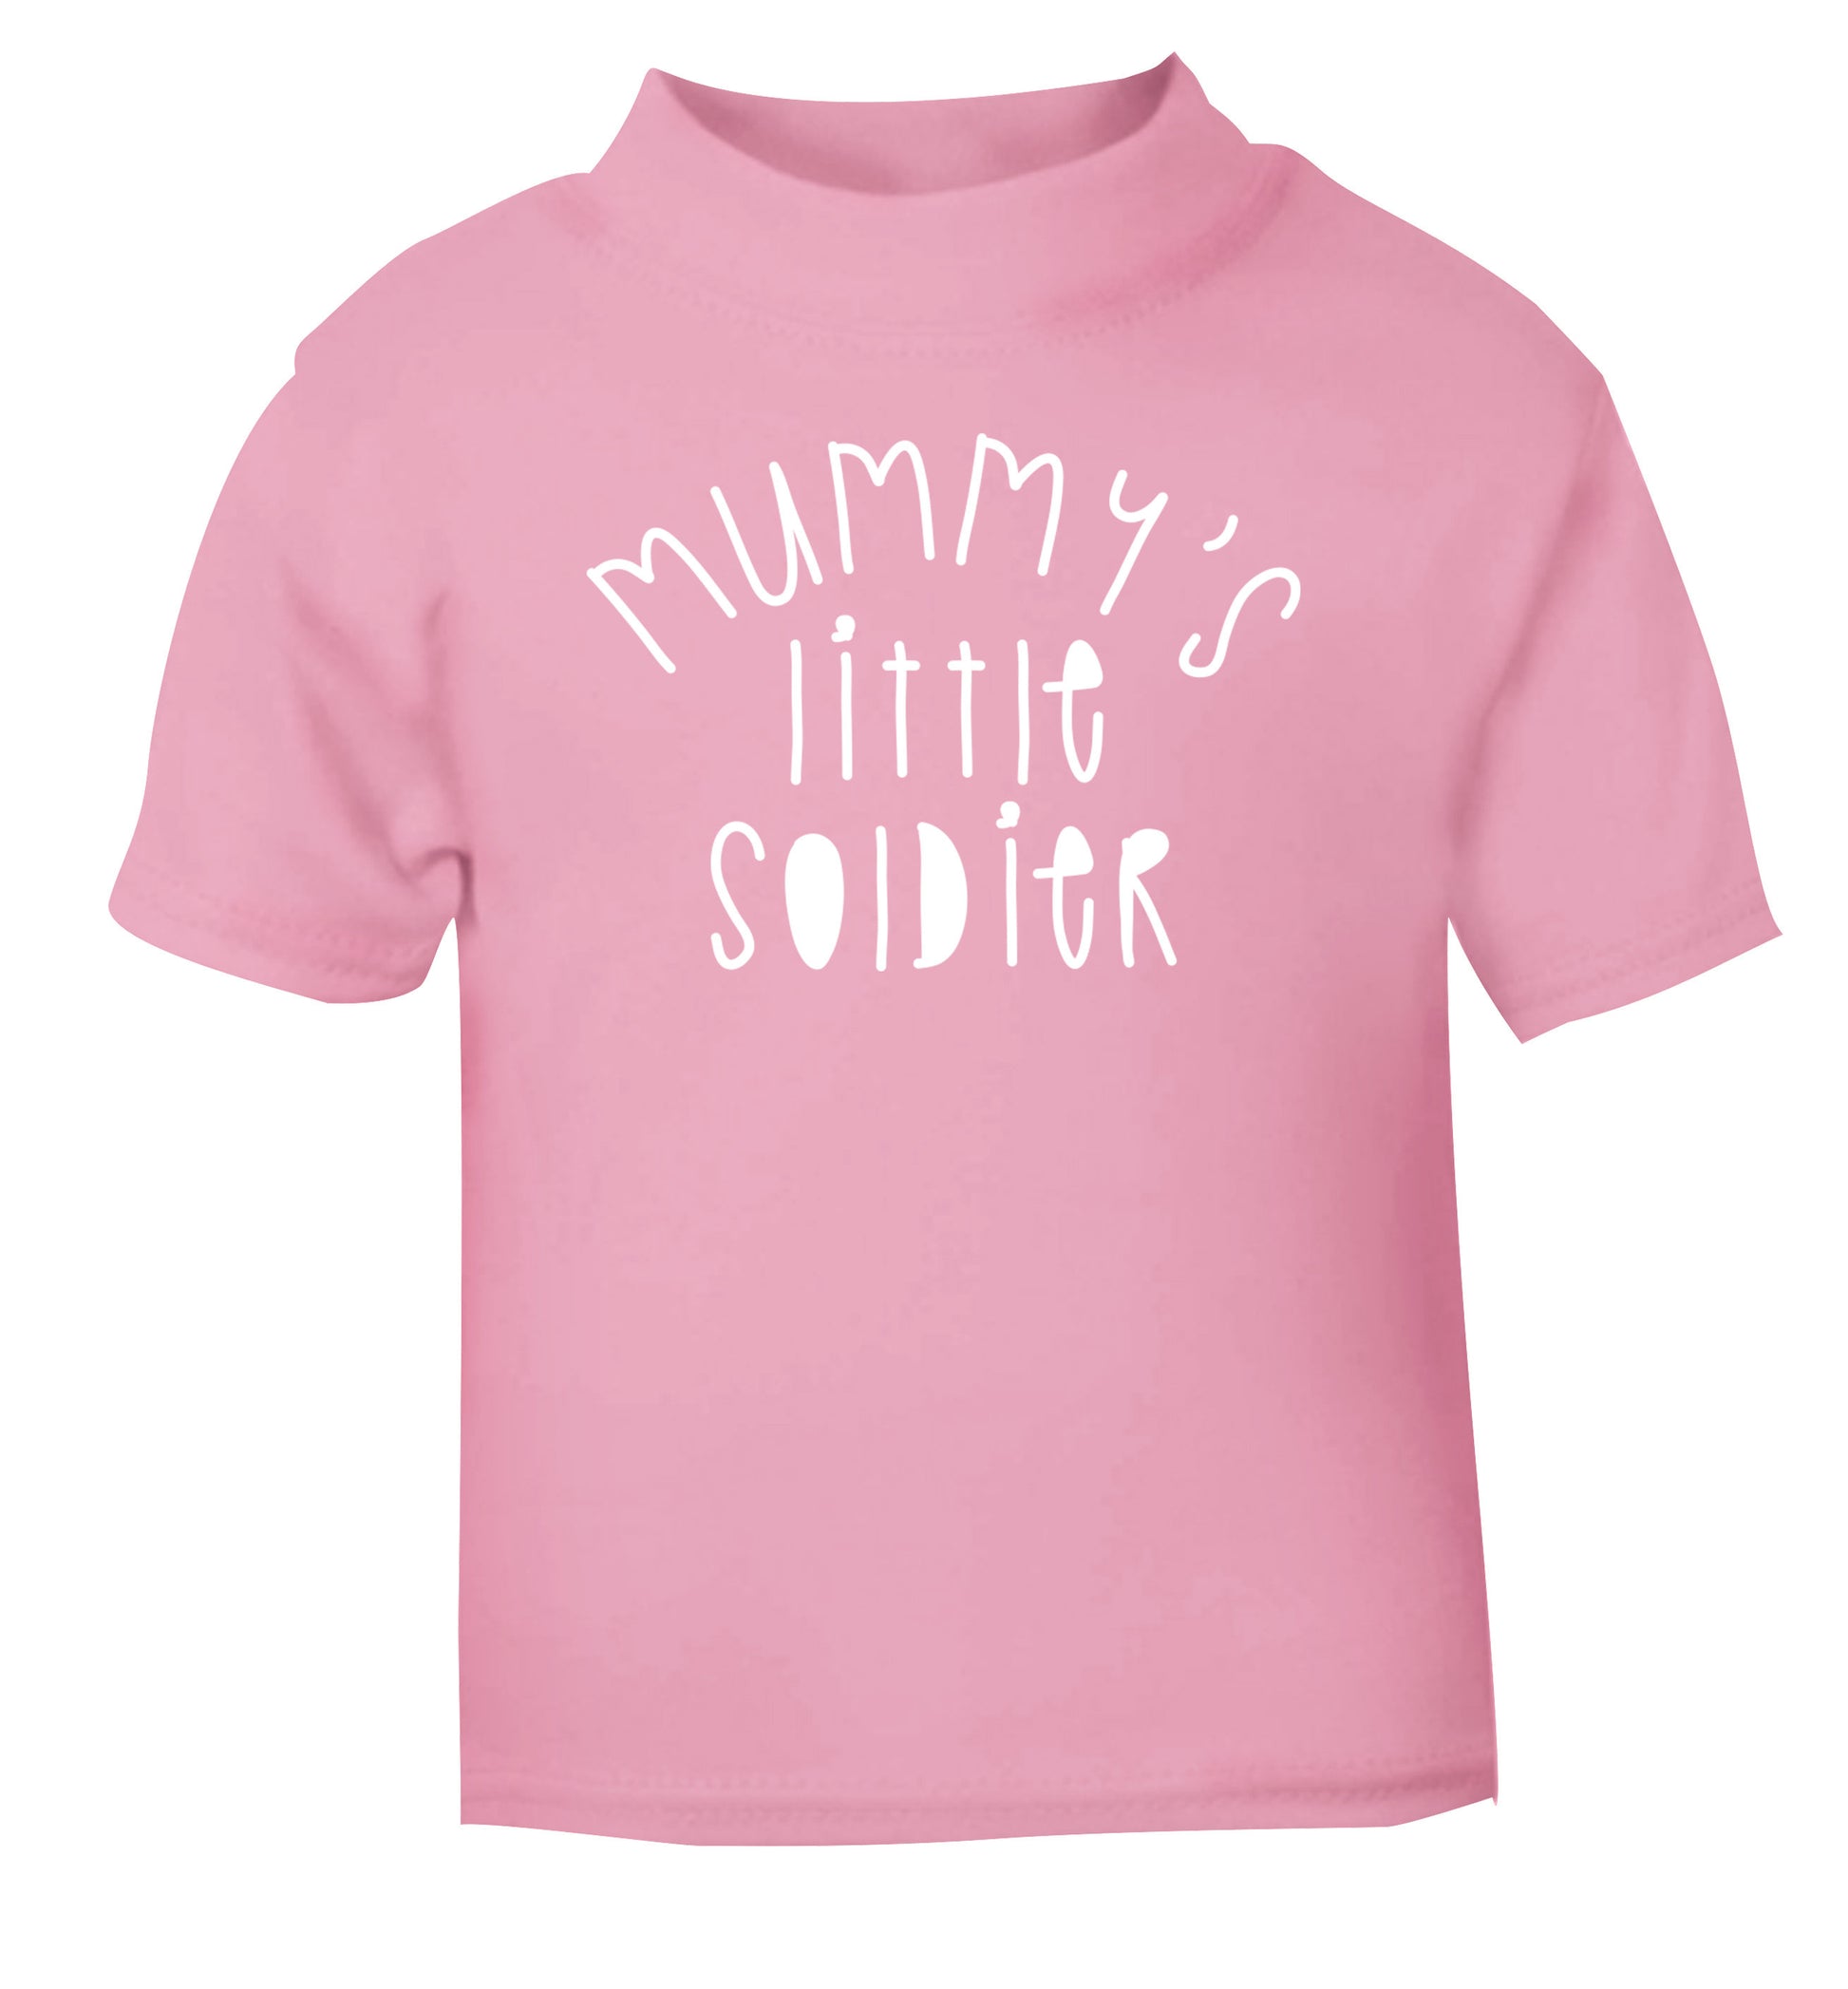 Mummy's little soldier light pink Baby Toddler Tshirt 2 Years